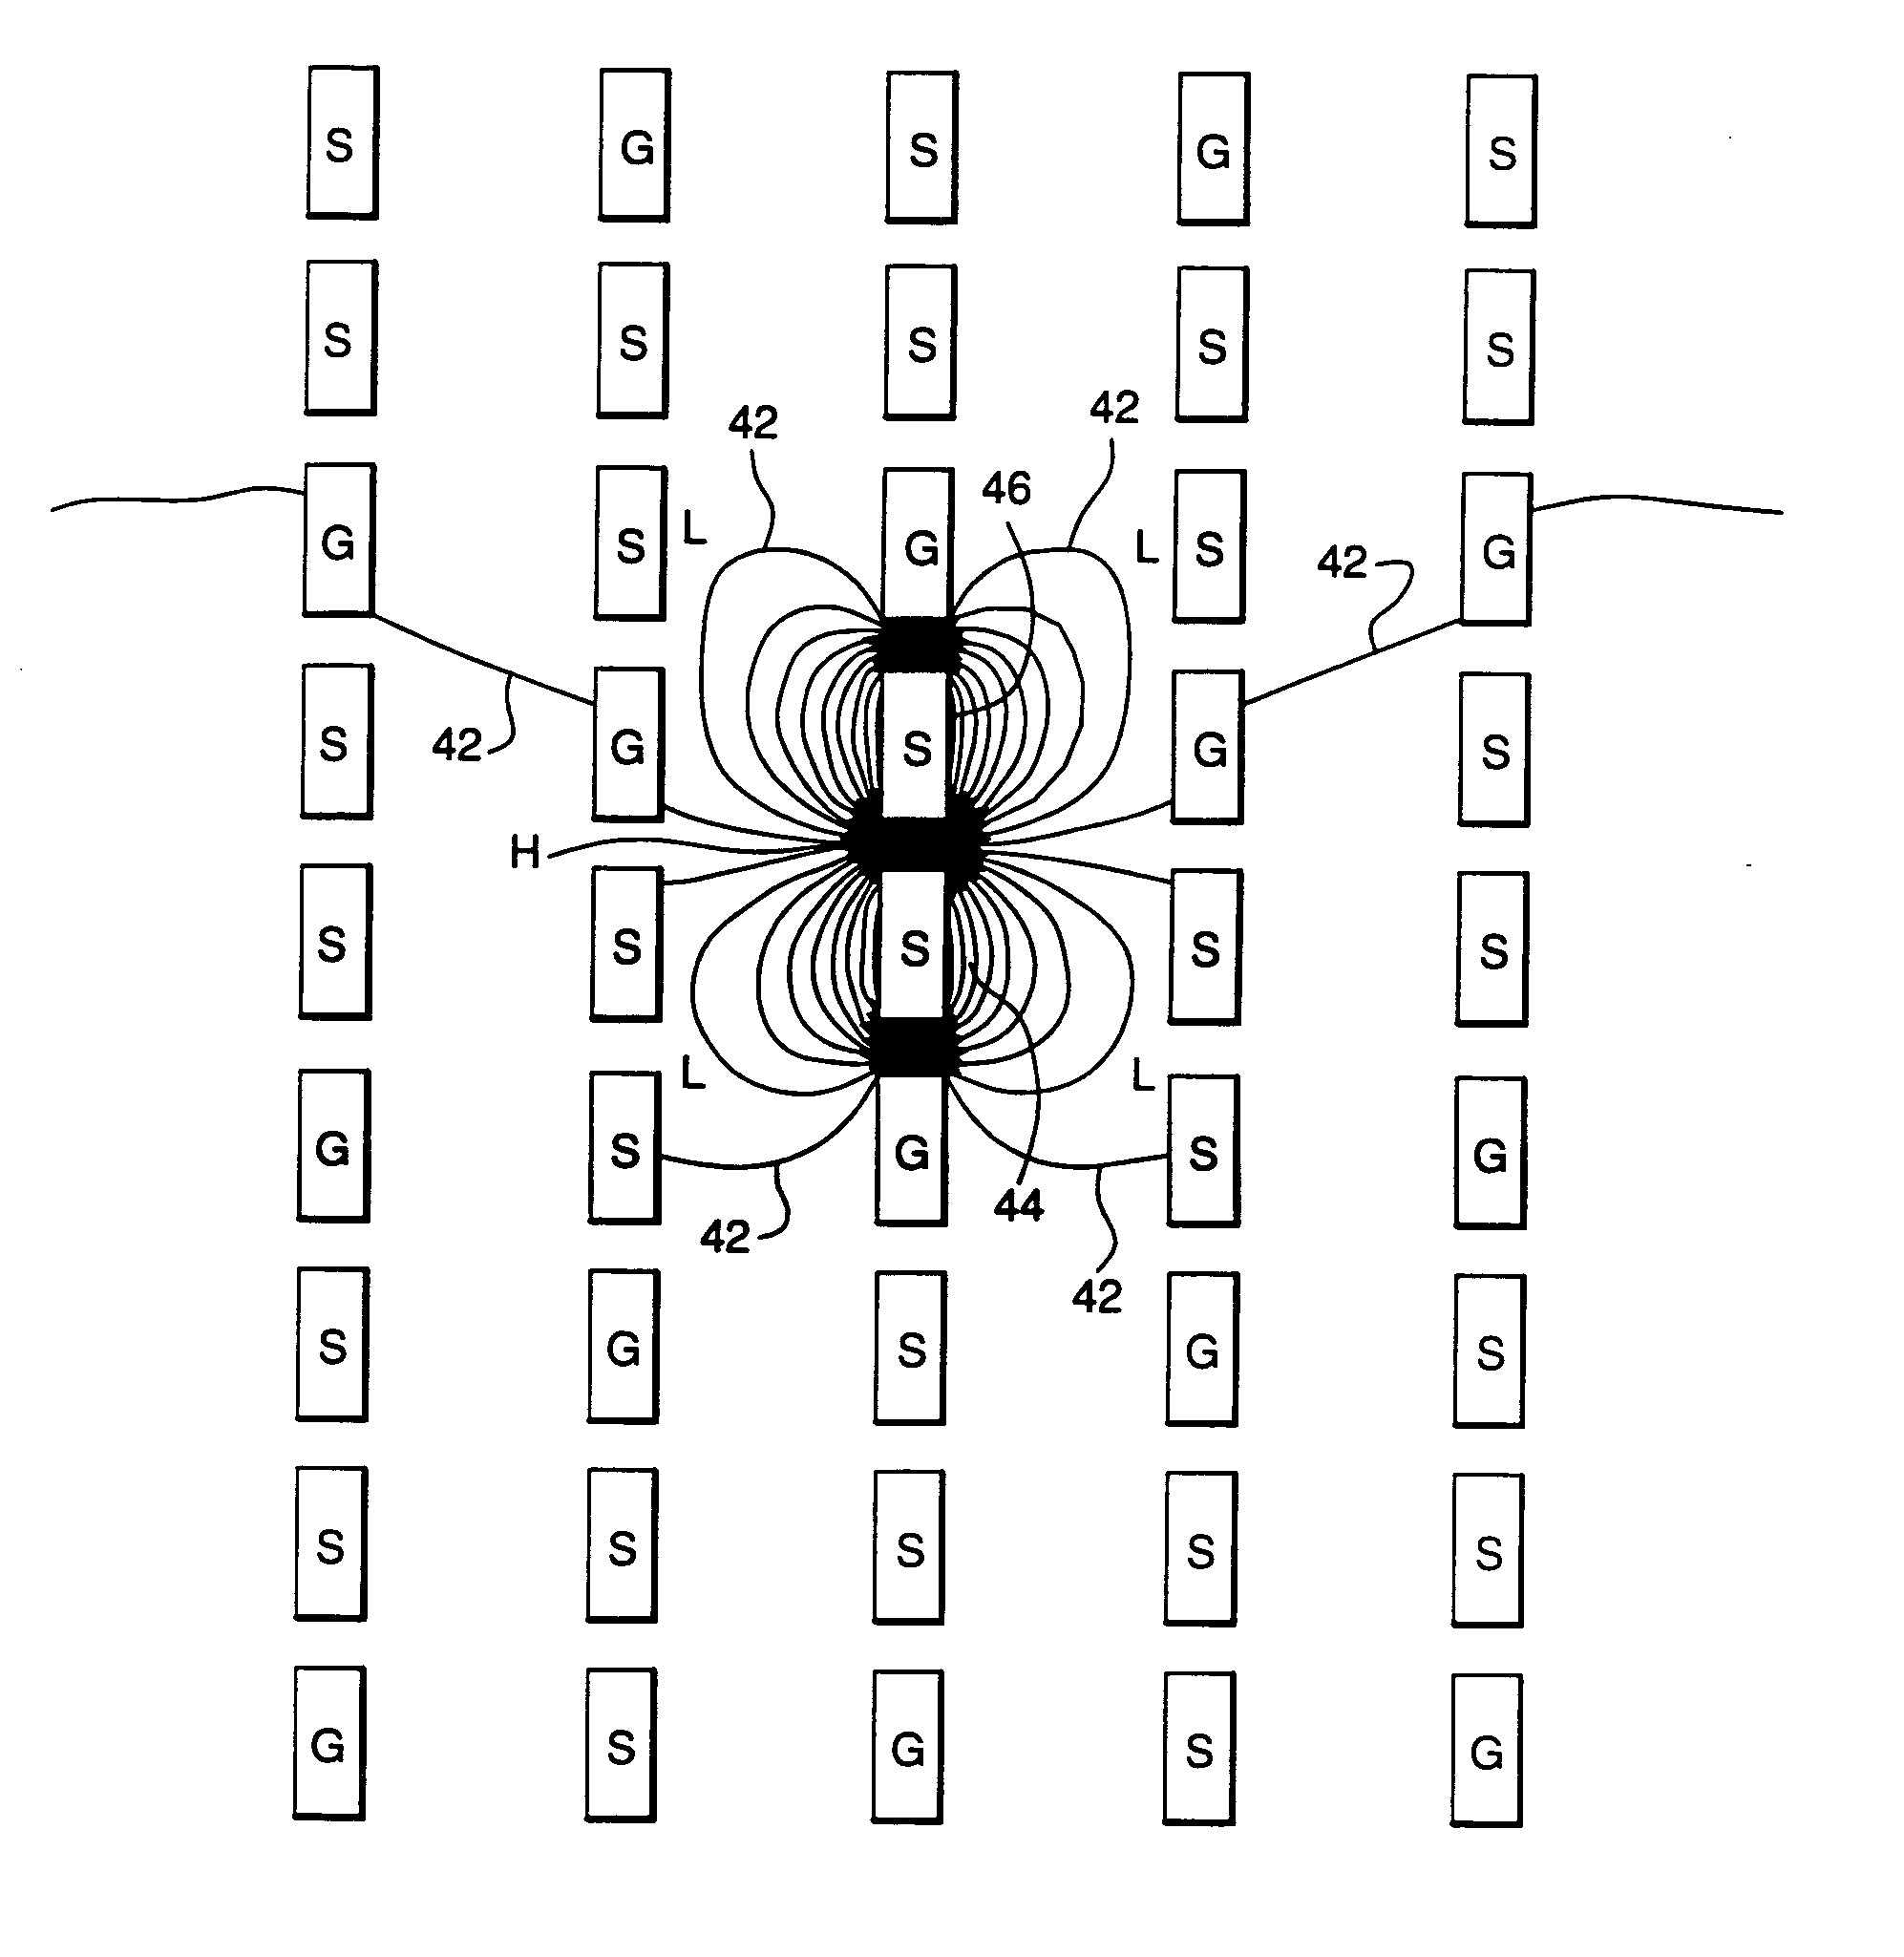 Electrical connectors having differential signal pairs configured to reduce cross-talk on adjacent pairs